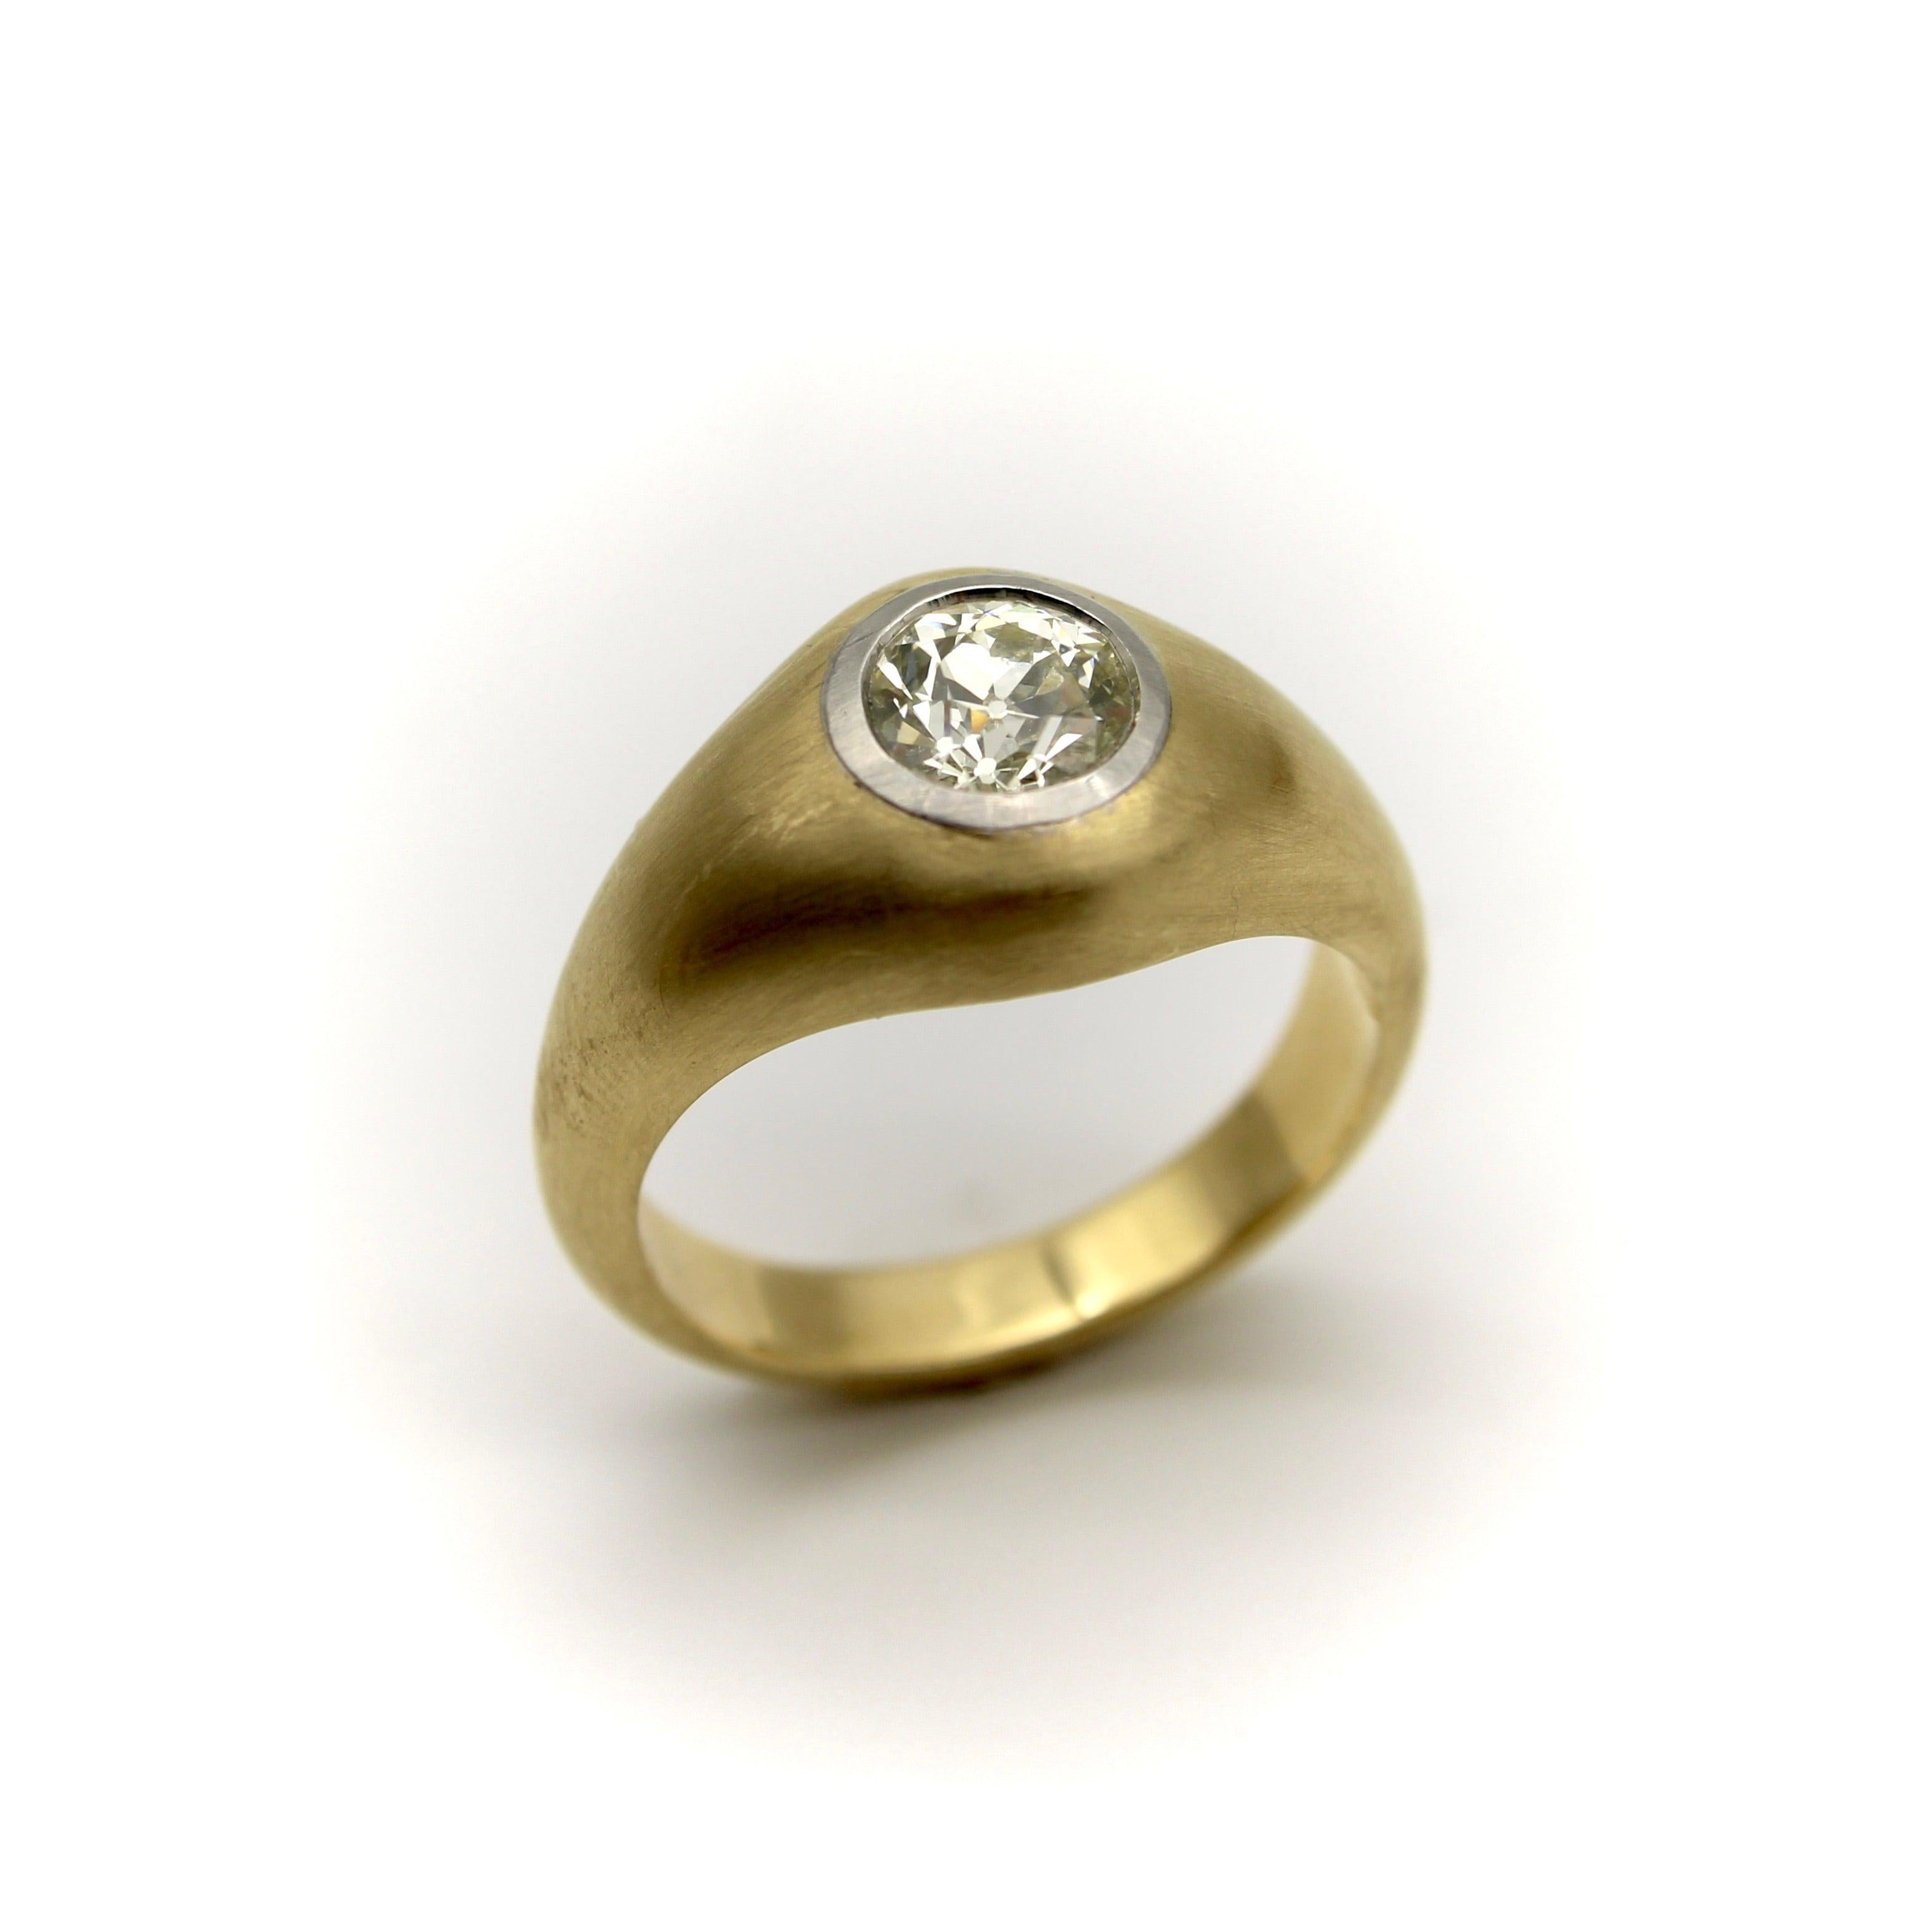 Part of Kirsten’s Corner Signature Collection, this 18k gold and Old European cut diamond ring is a contemporary variation of a Victorian ring. The overall shape was taken from the antique version, but the design was made more fluid with the